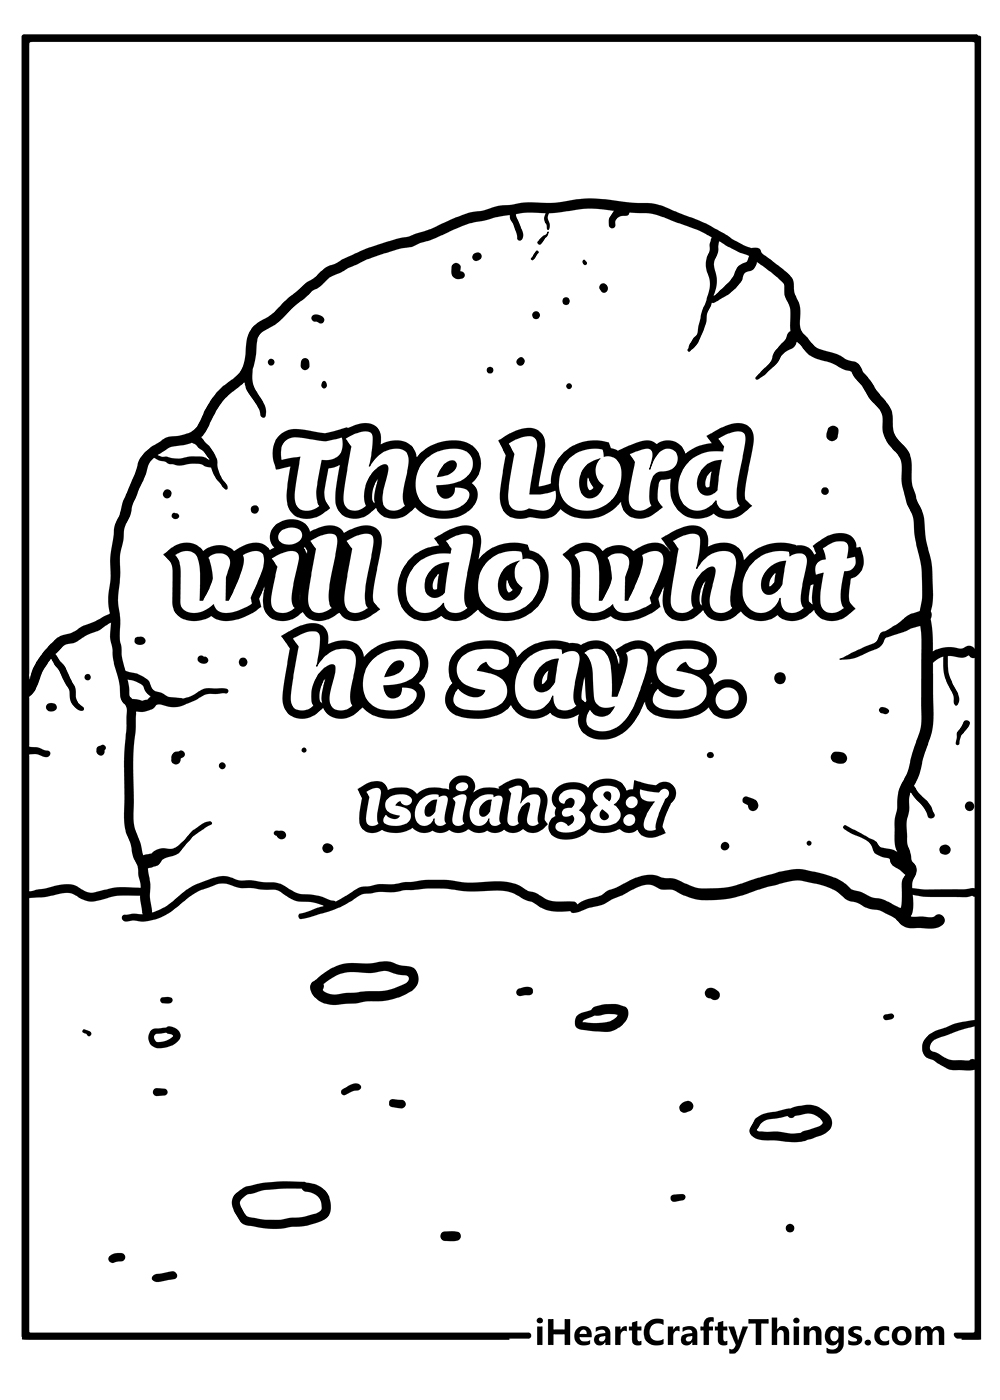 Bible verse coloring pages free printables